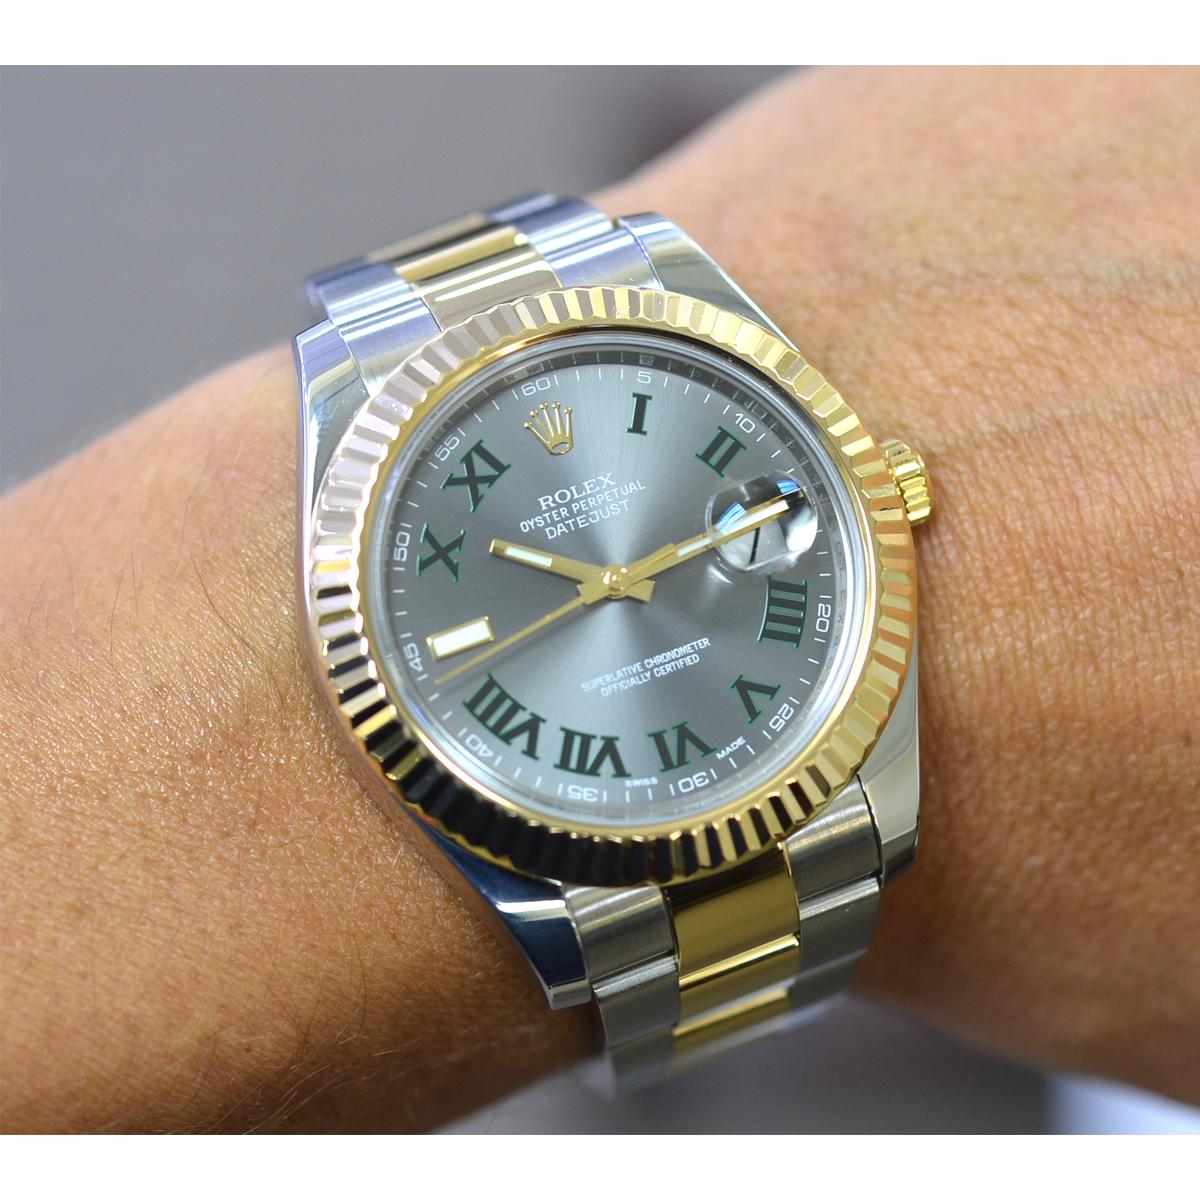 Rolex 116333 Datejust II Two-Tone Slate Dial Automatic Watch 5